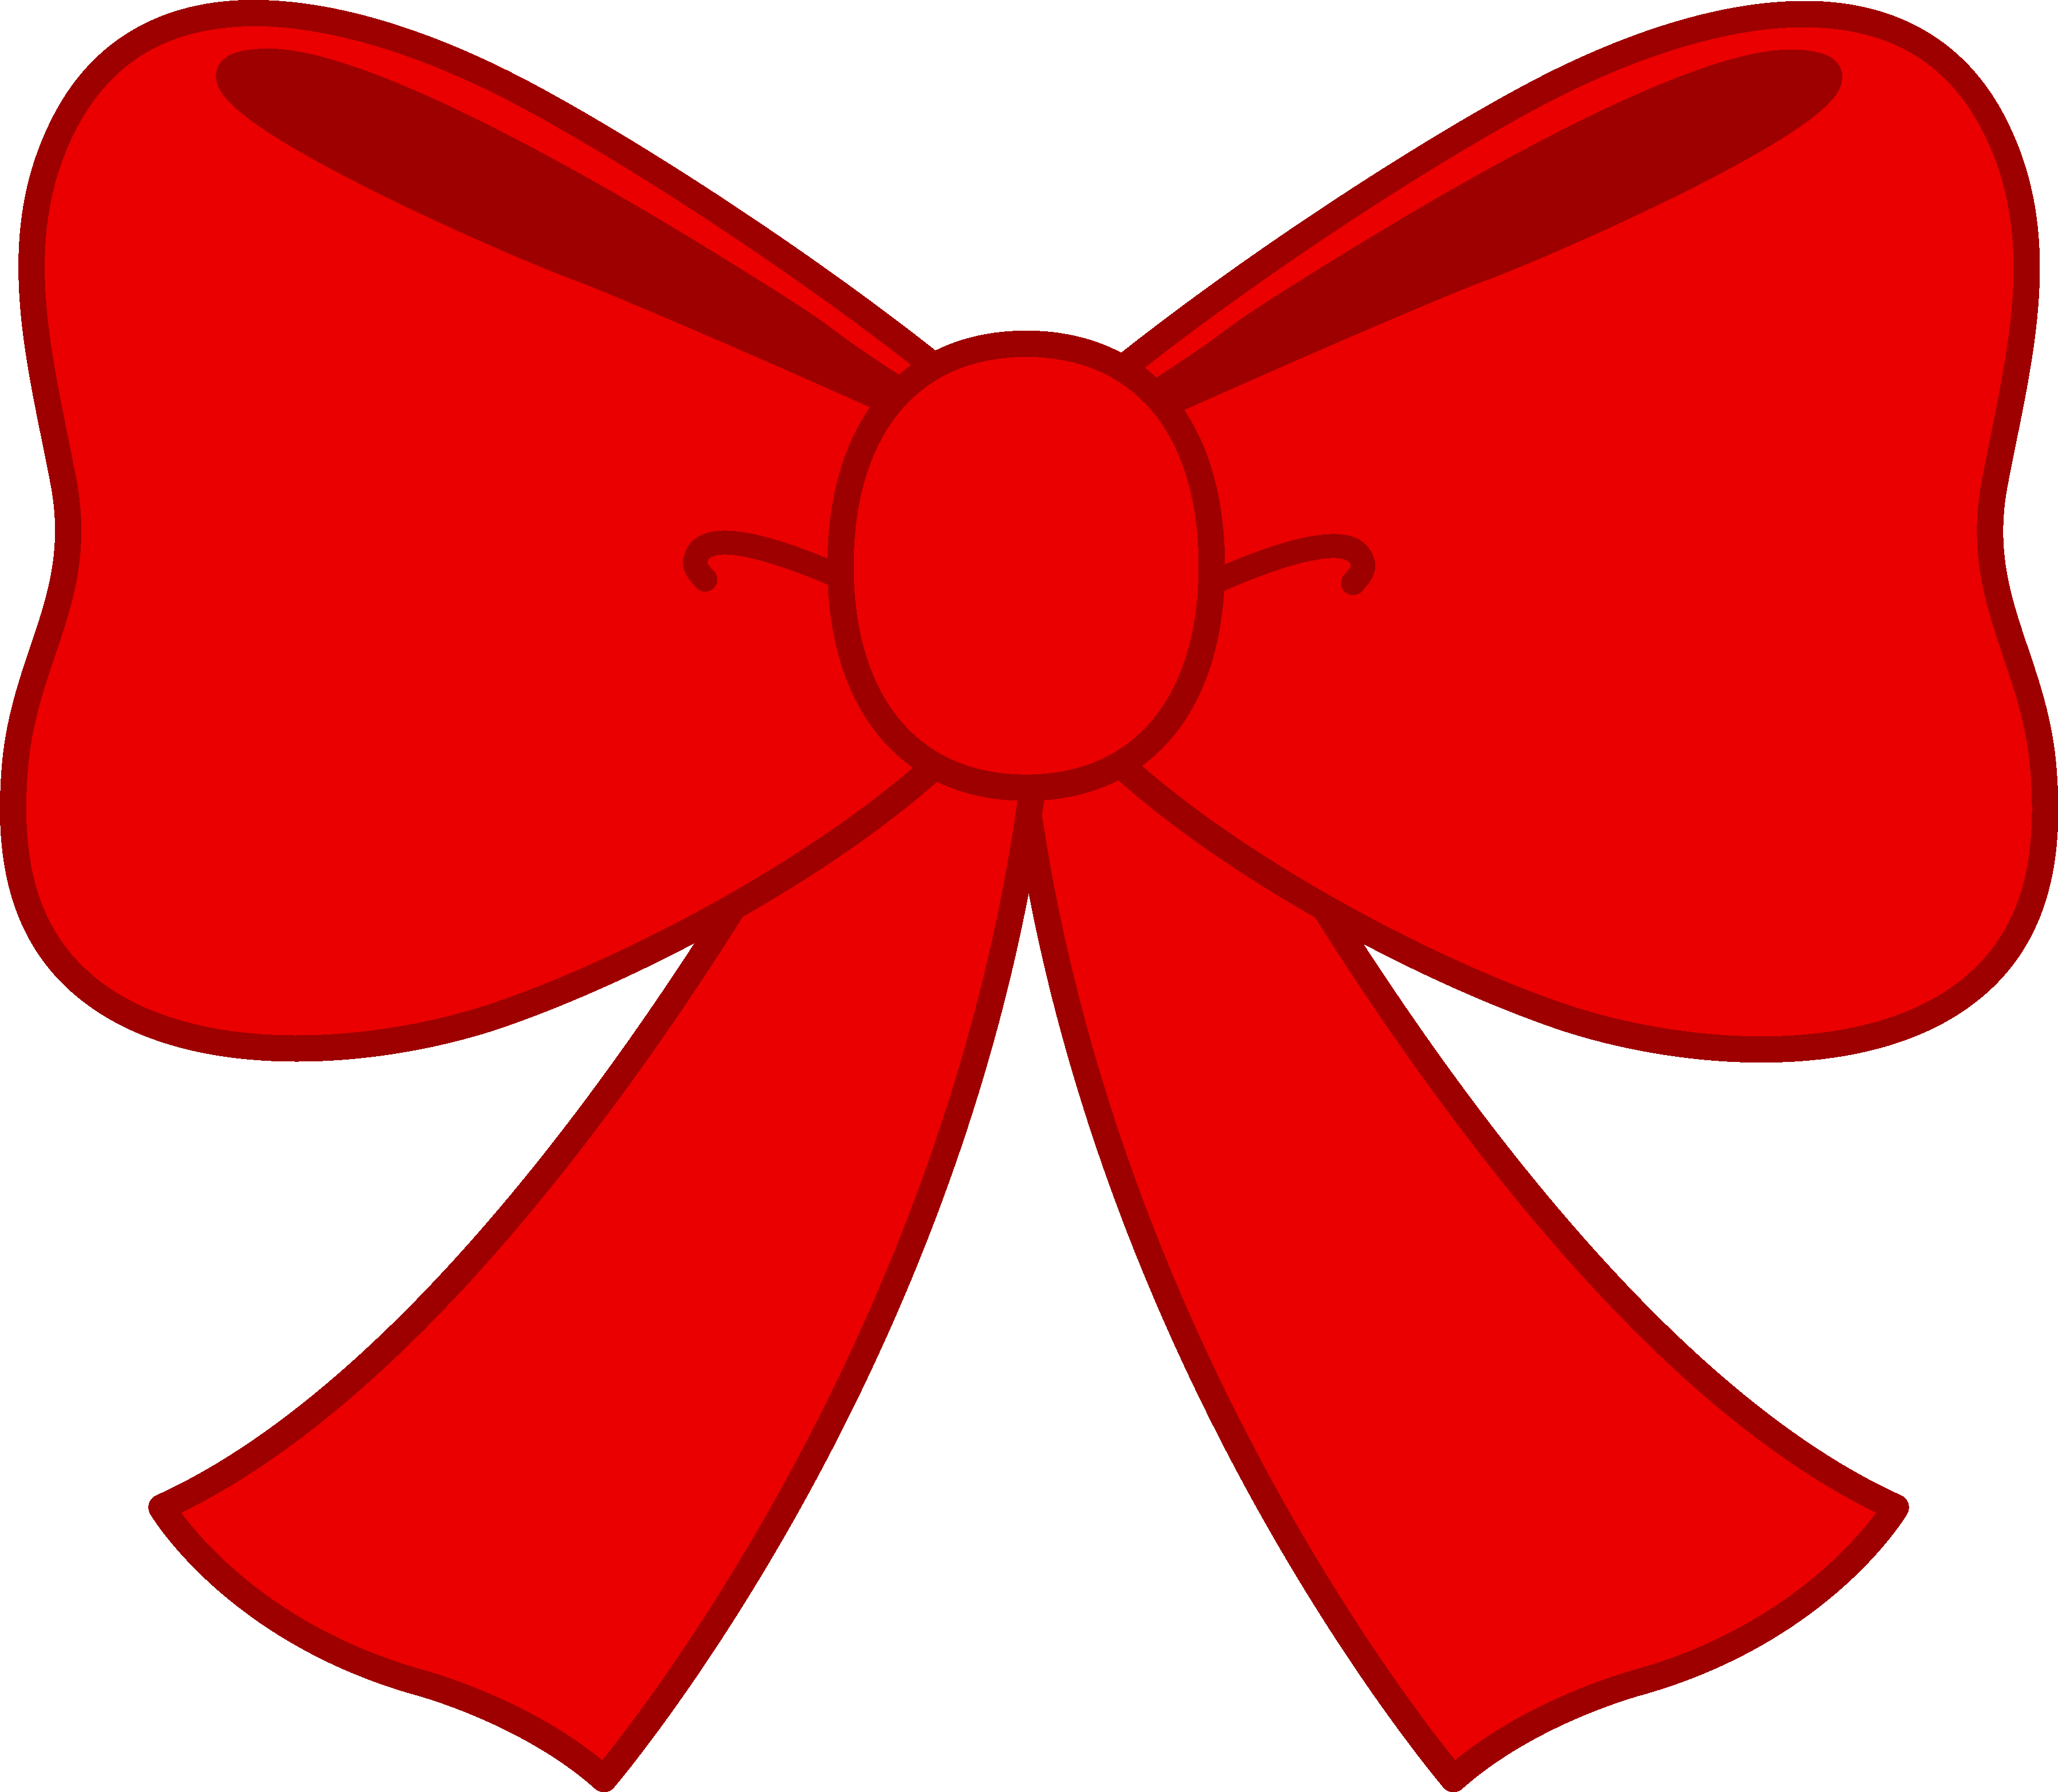 Free Red Bow Images, Download Free Clip Art, Free Clip Art.